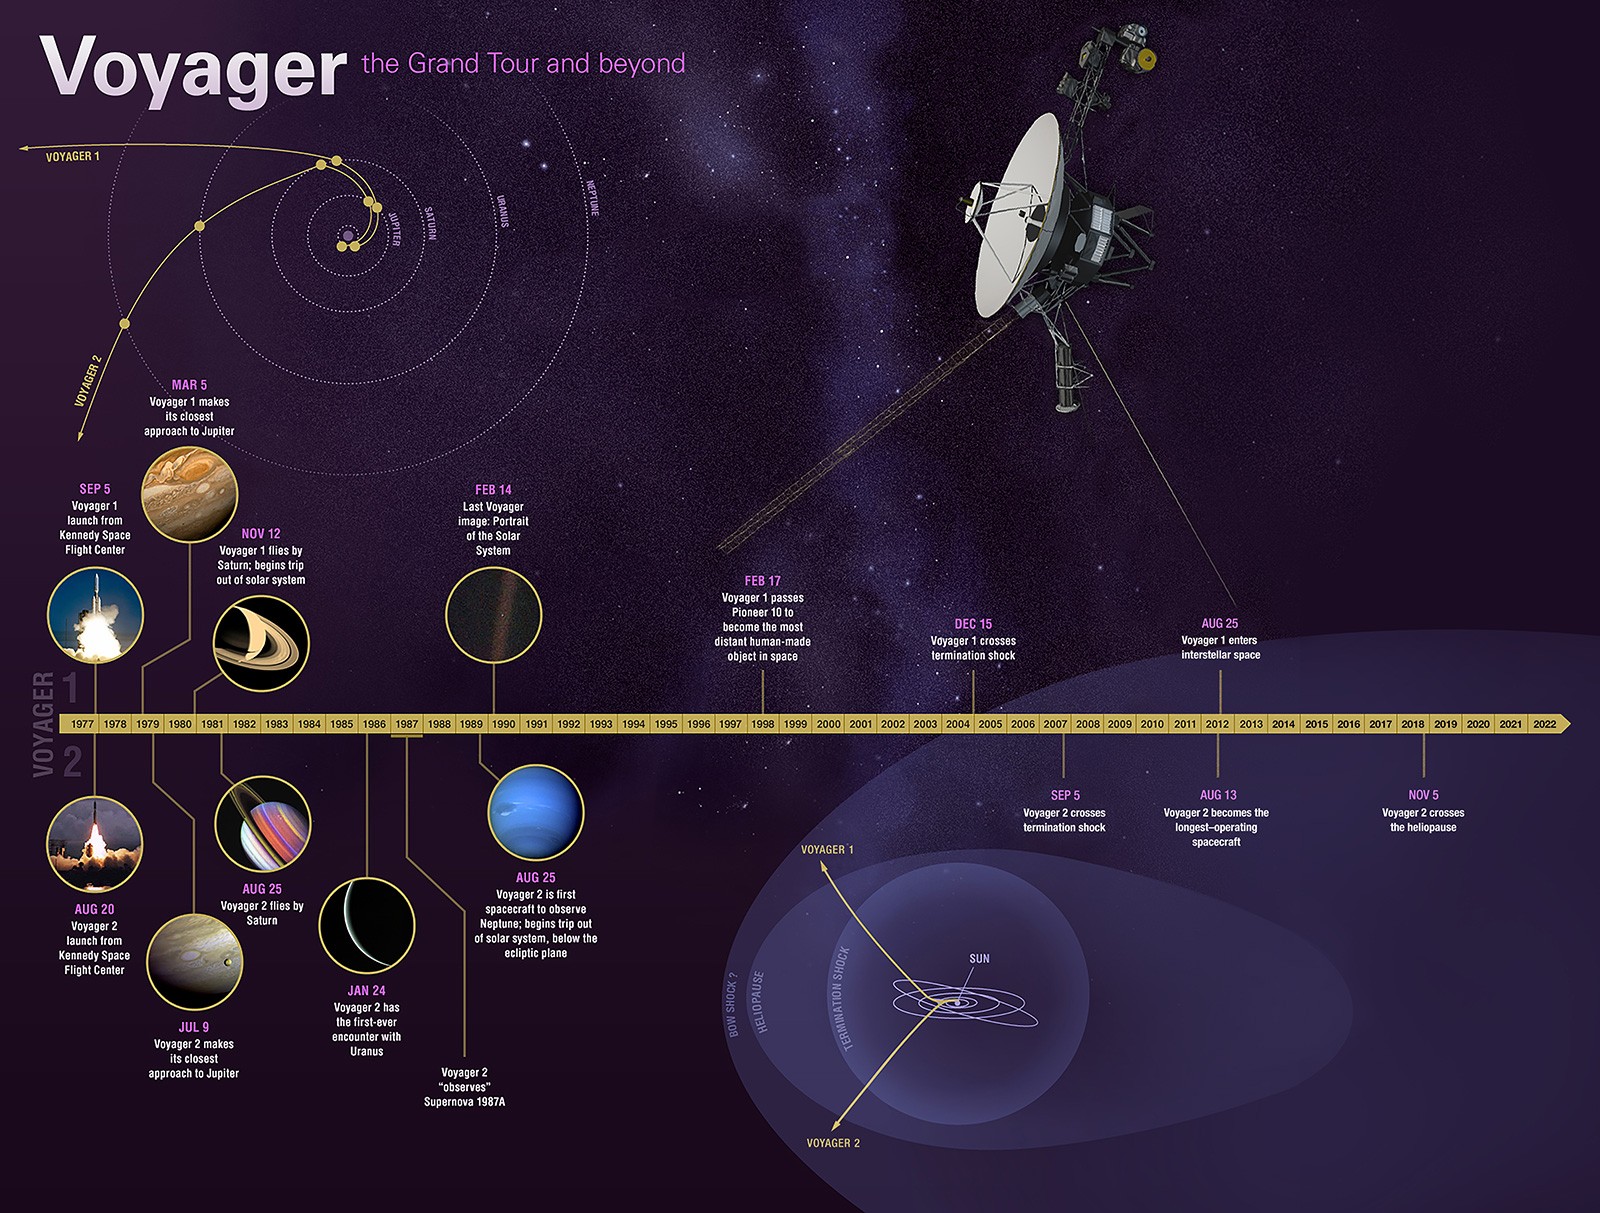 Voyager 2 Tυrns 45, Let's Take This Occasion To Celebrate Space Exploration